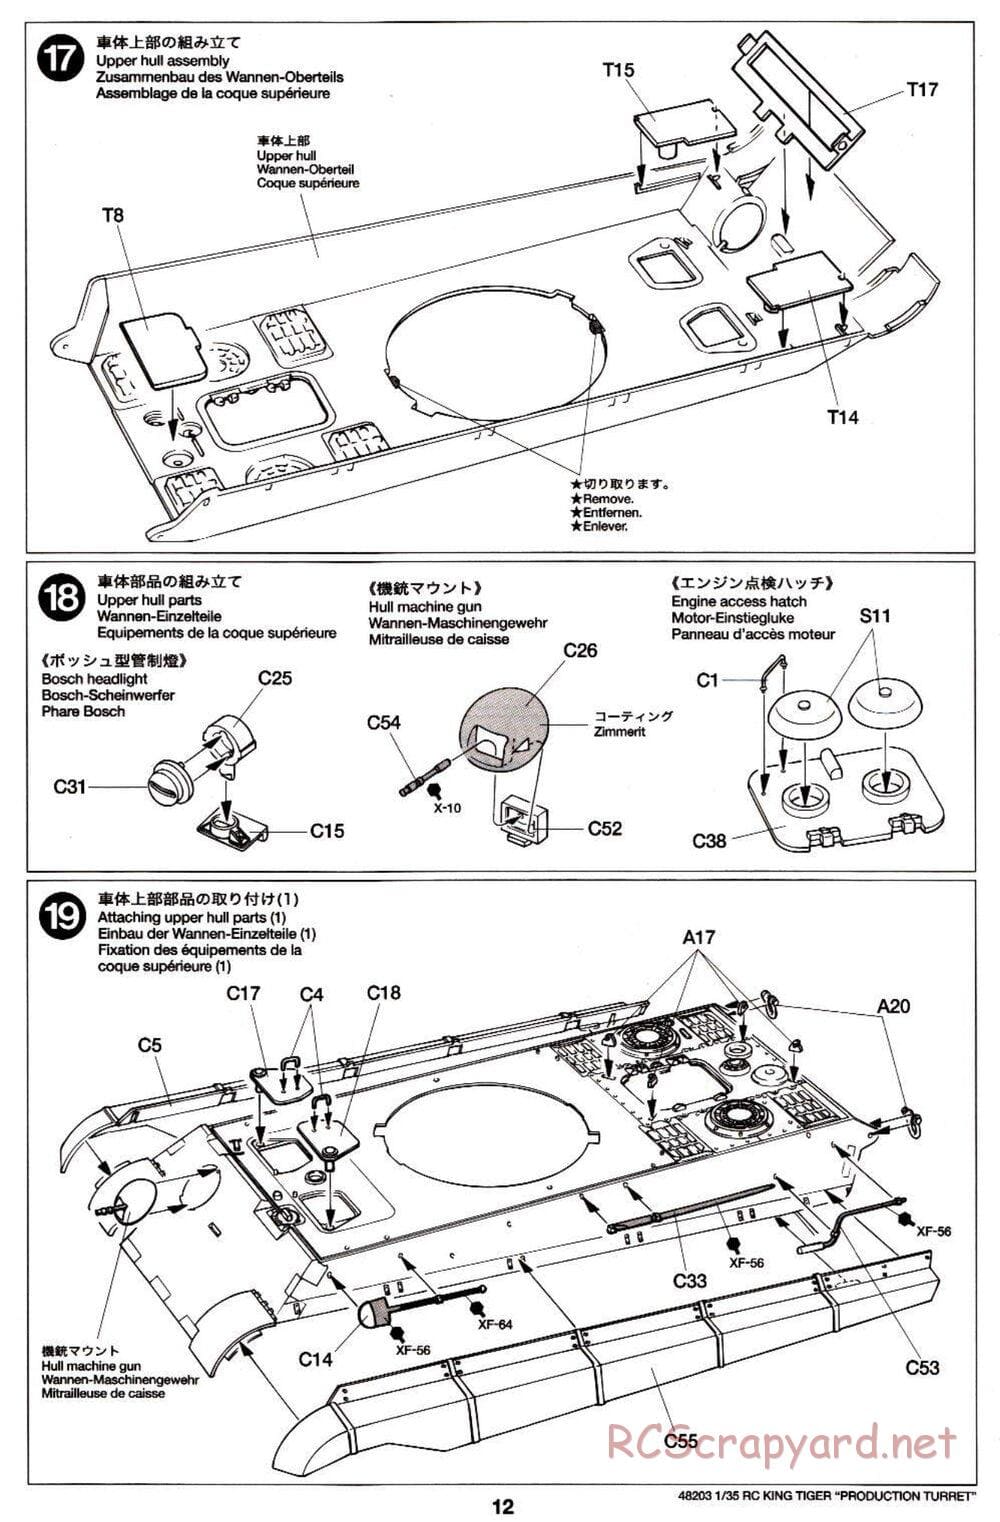 Tamiya - German King Tiger (Production Turret) - 1/35 Scale Chassis - Manual - Page 12